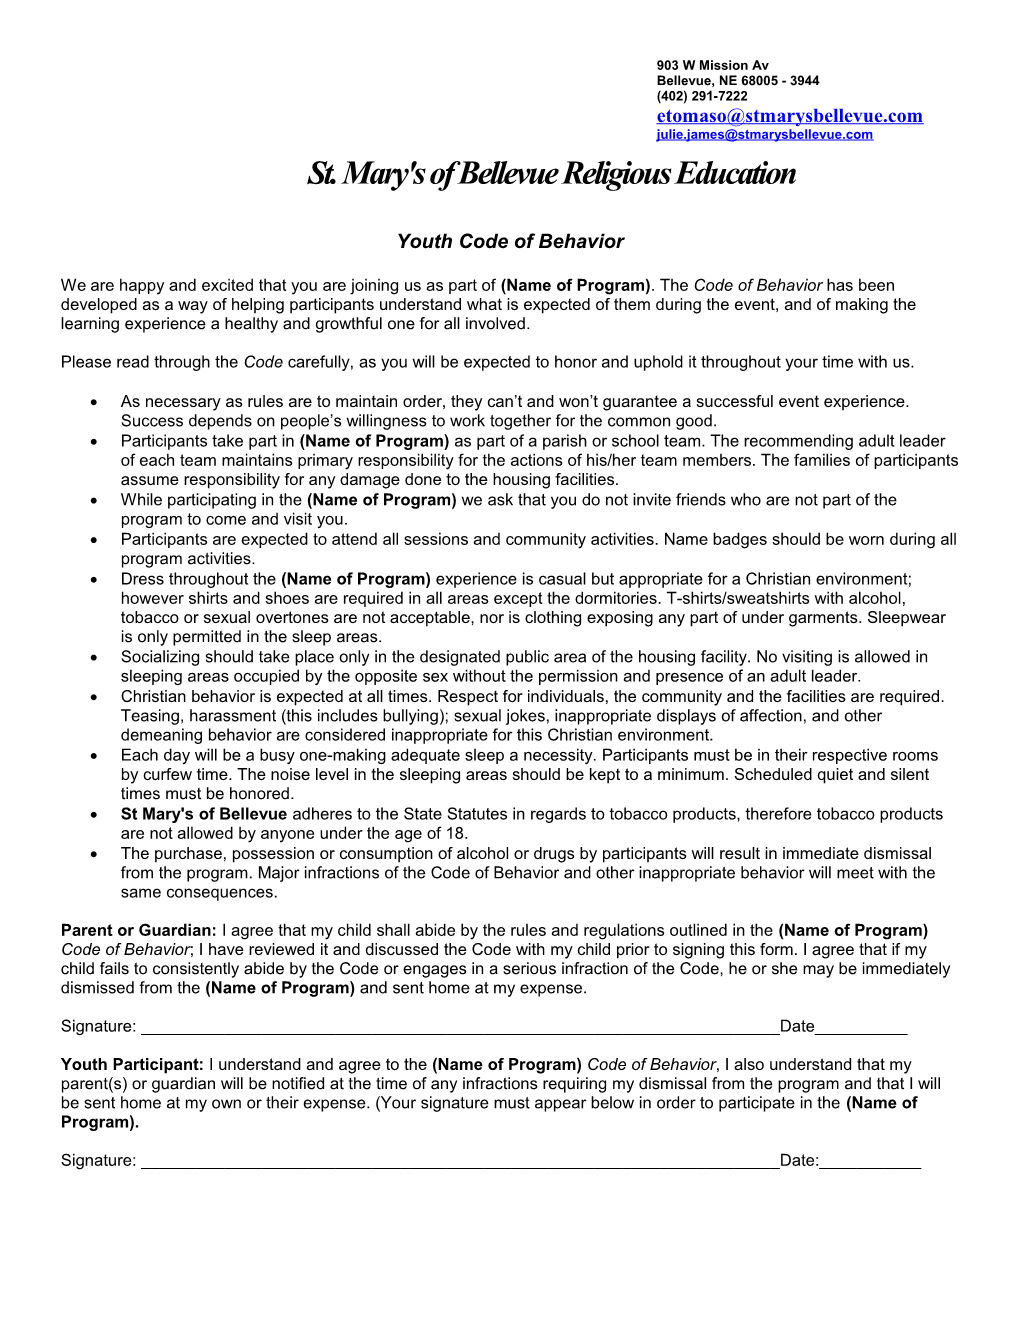 St. Mary's of Bellevue Religious Education